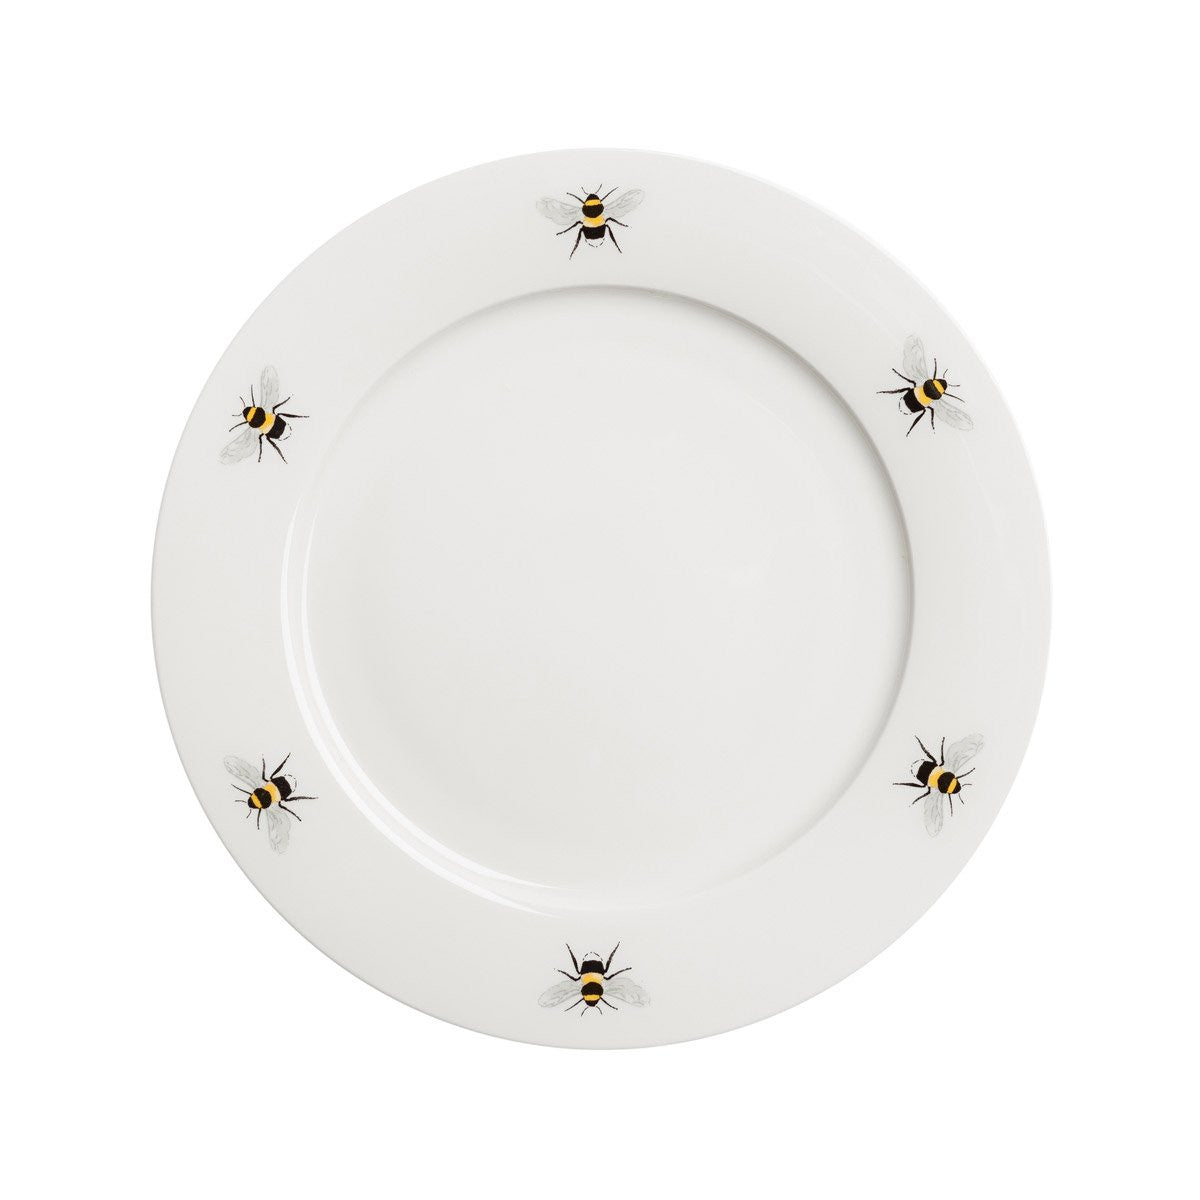 Bees Side Plate – The Bee's Knees British Imports